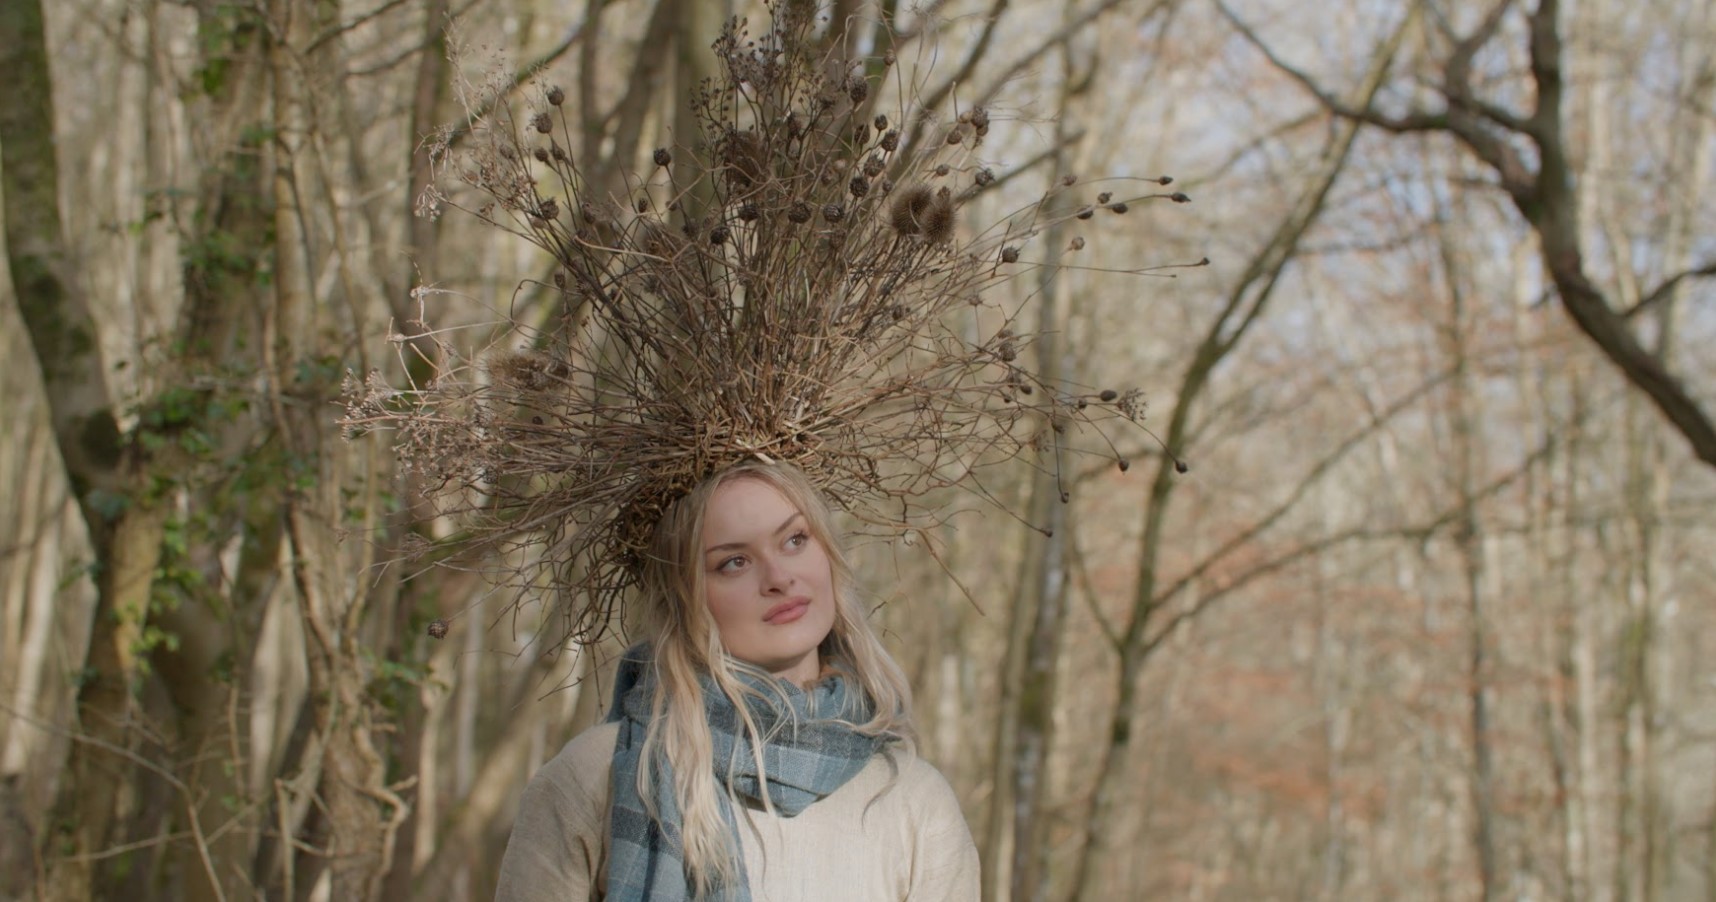 a person standing in the woods wearing an elaborate headdress made of dried plants